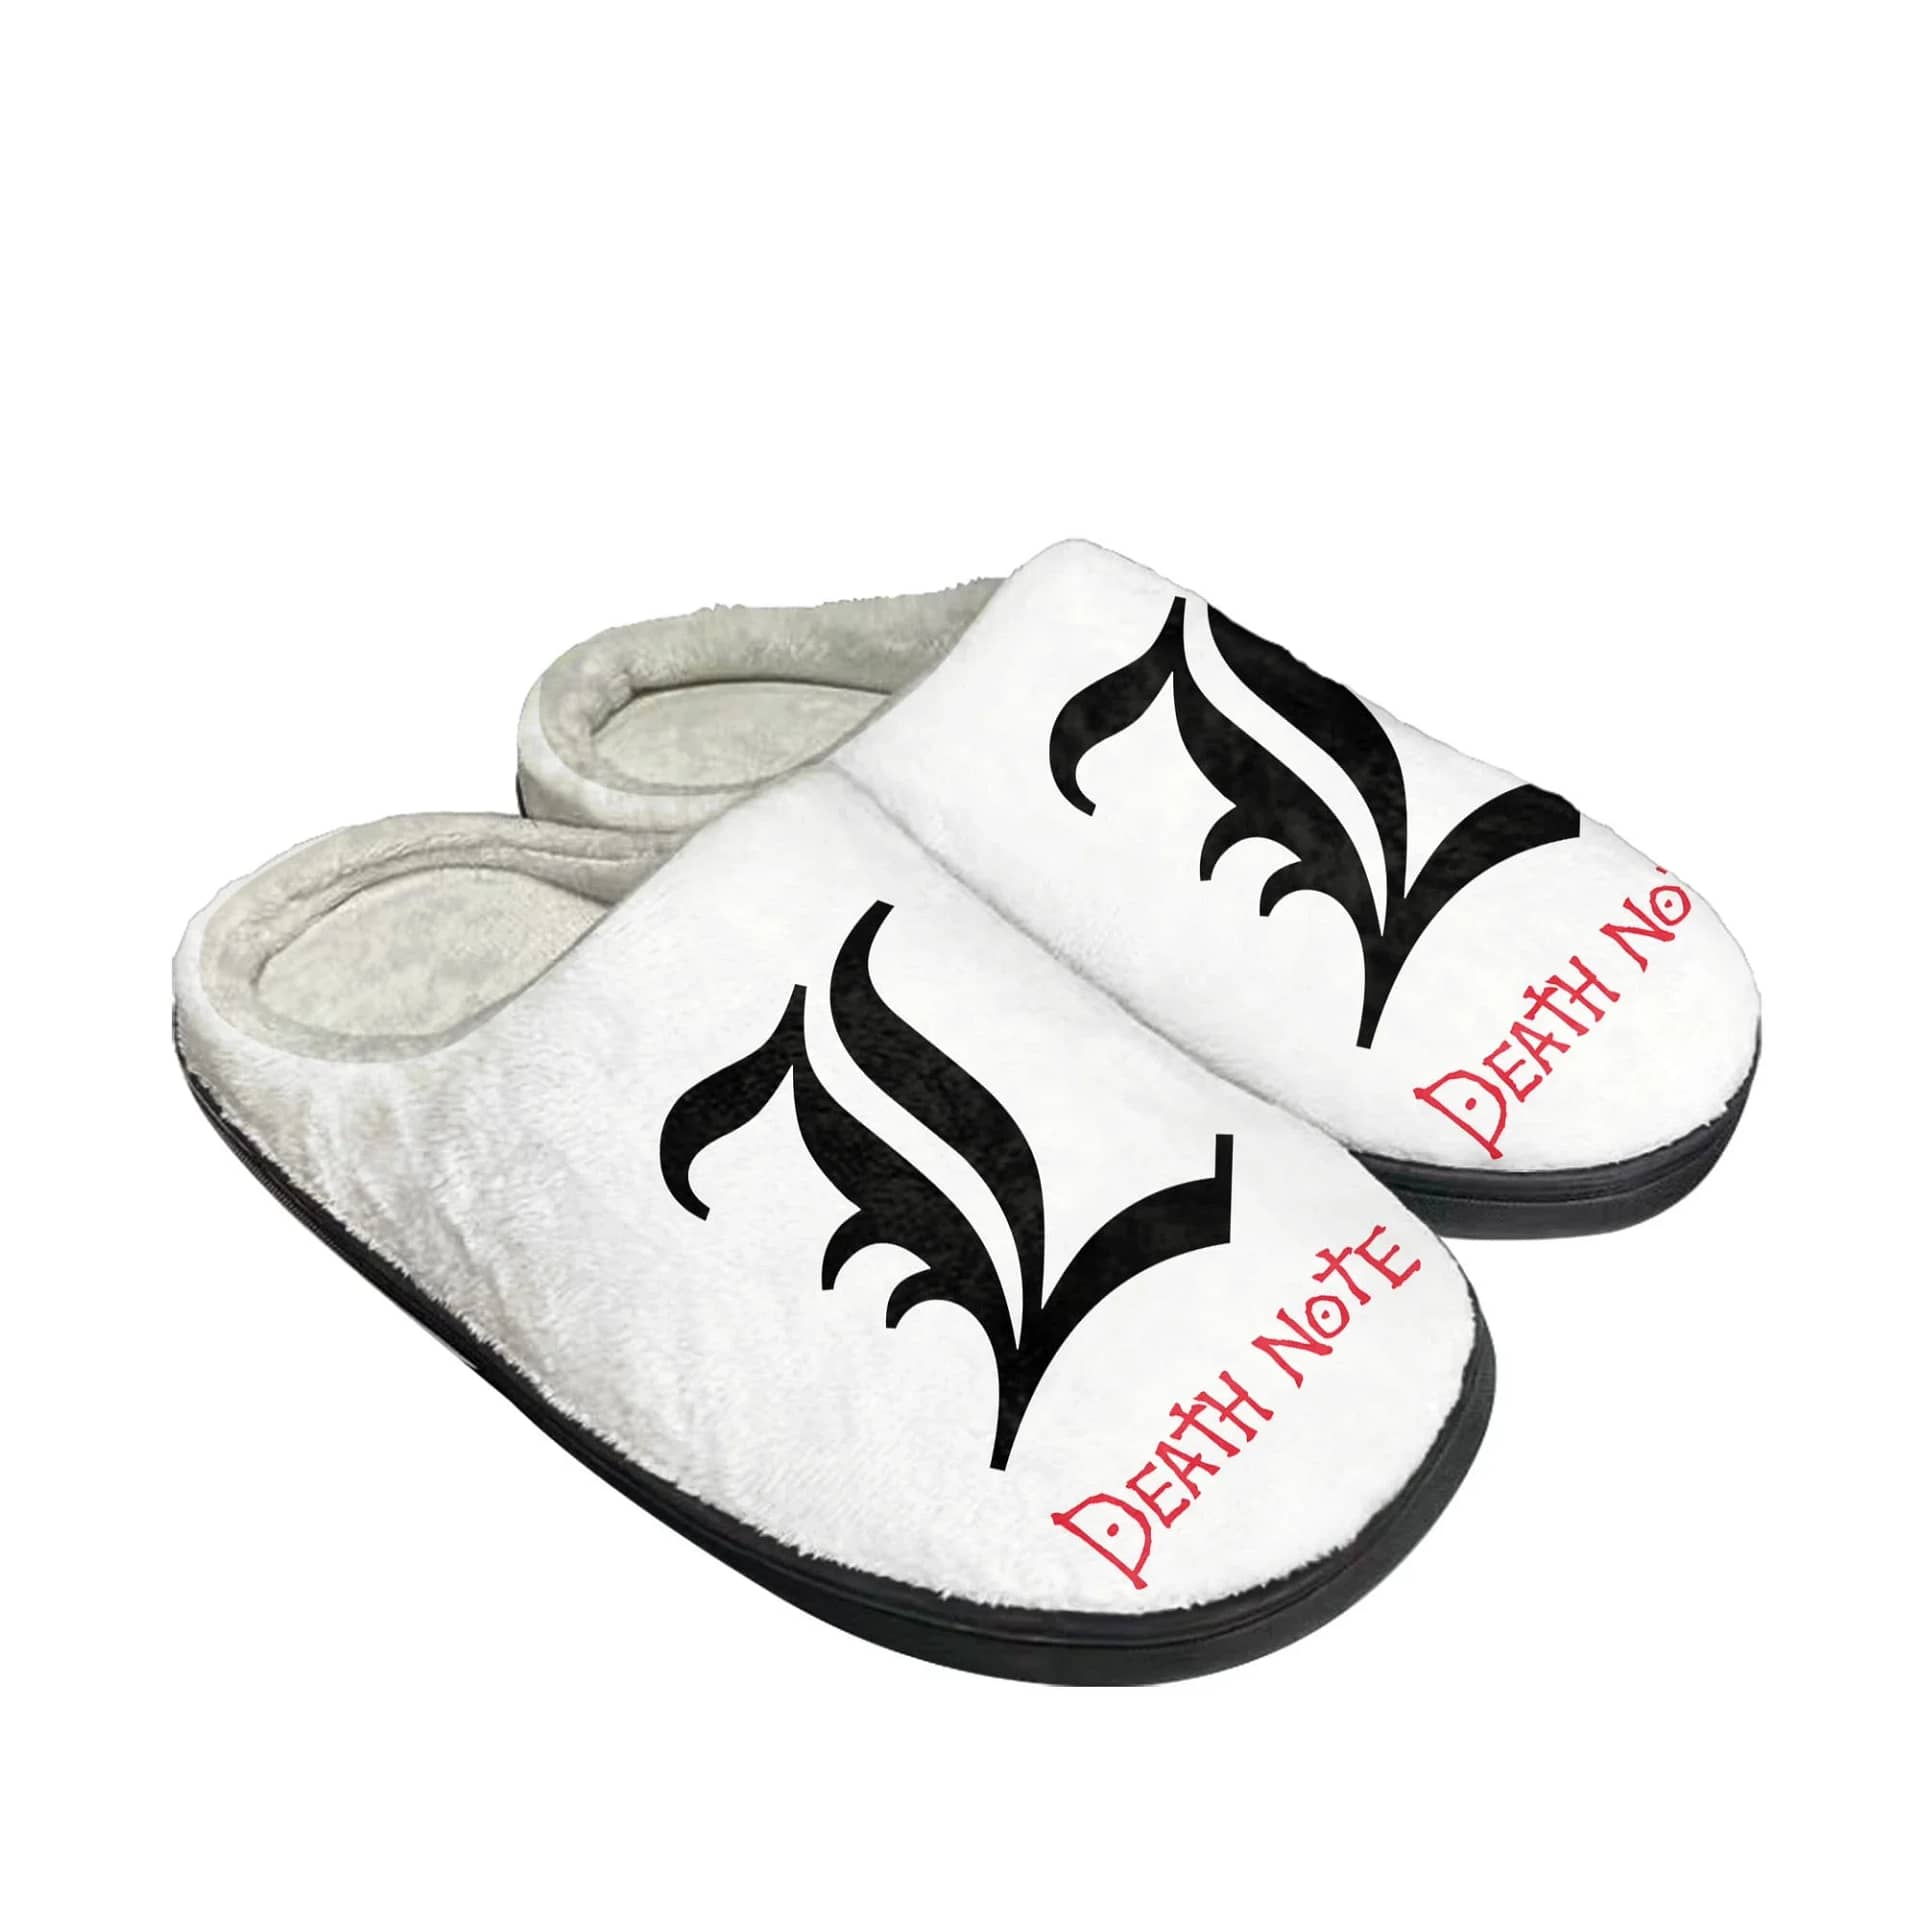 Anime Death Note Yagami Lawliet L Custom Shoes Slippers